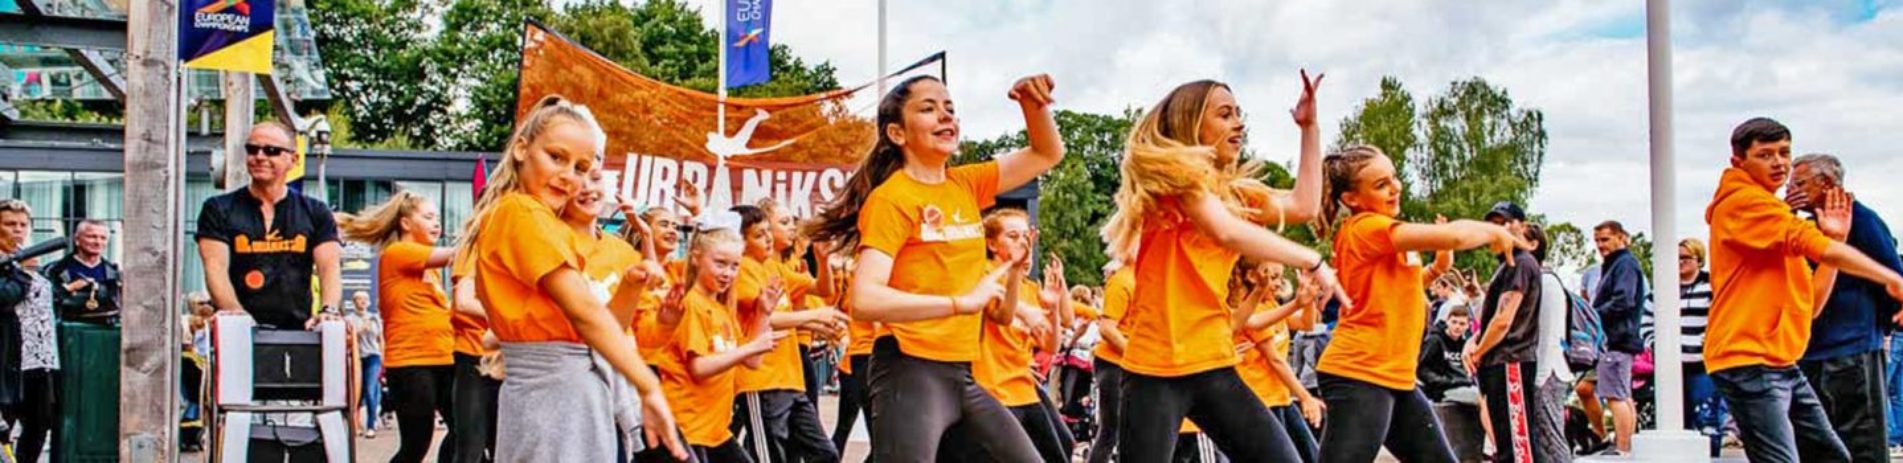 young-girls-and-boy-dressed-in-orange-t-shirts-dancing-at-balloch-festival-event-two-thousand-eighteen